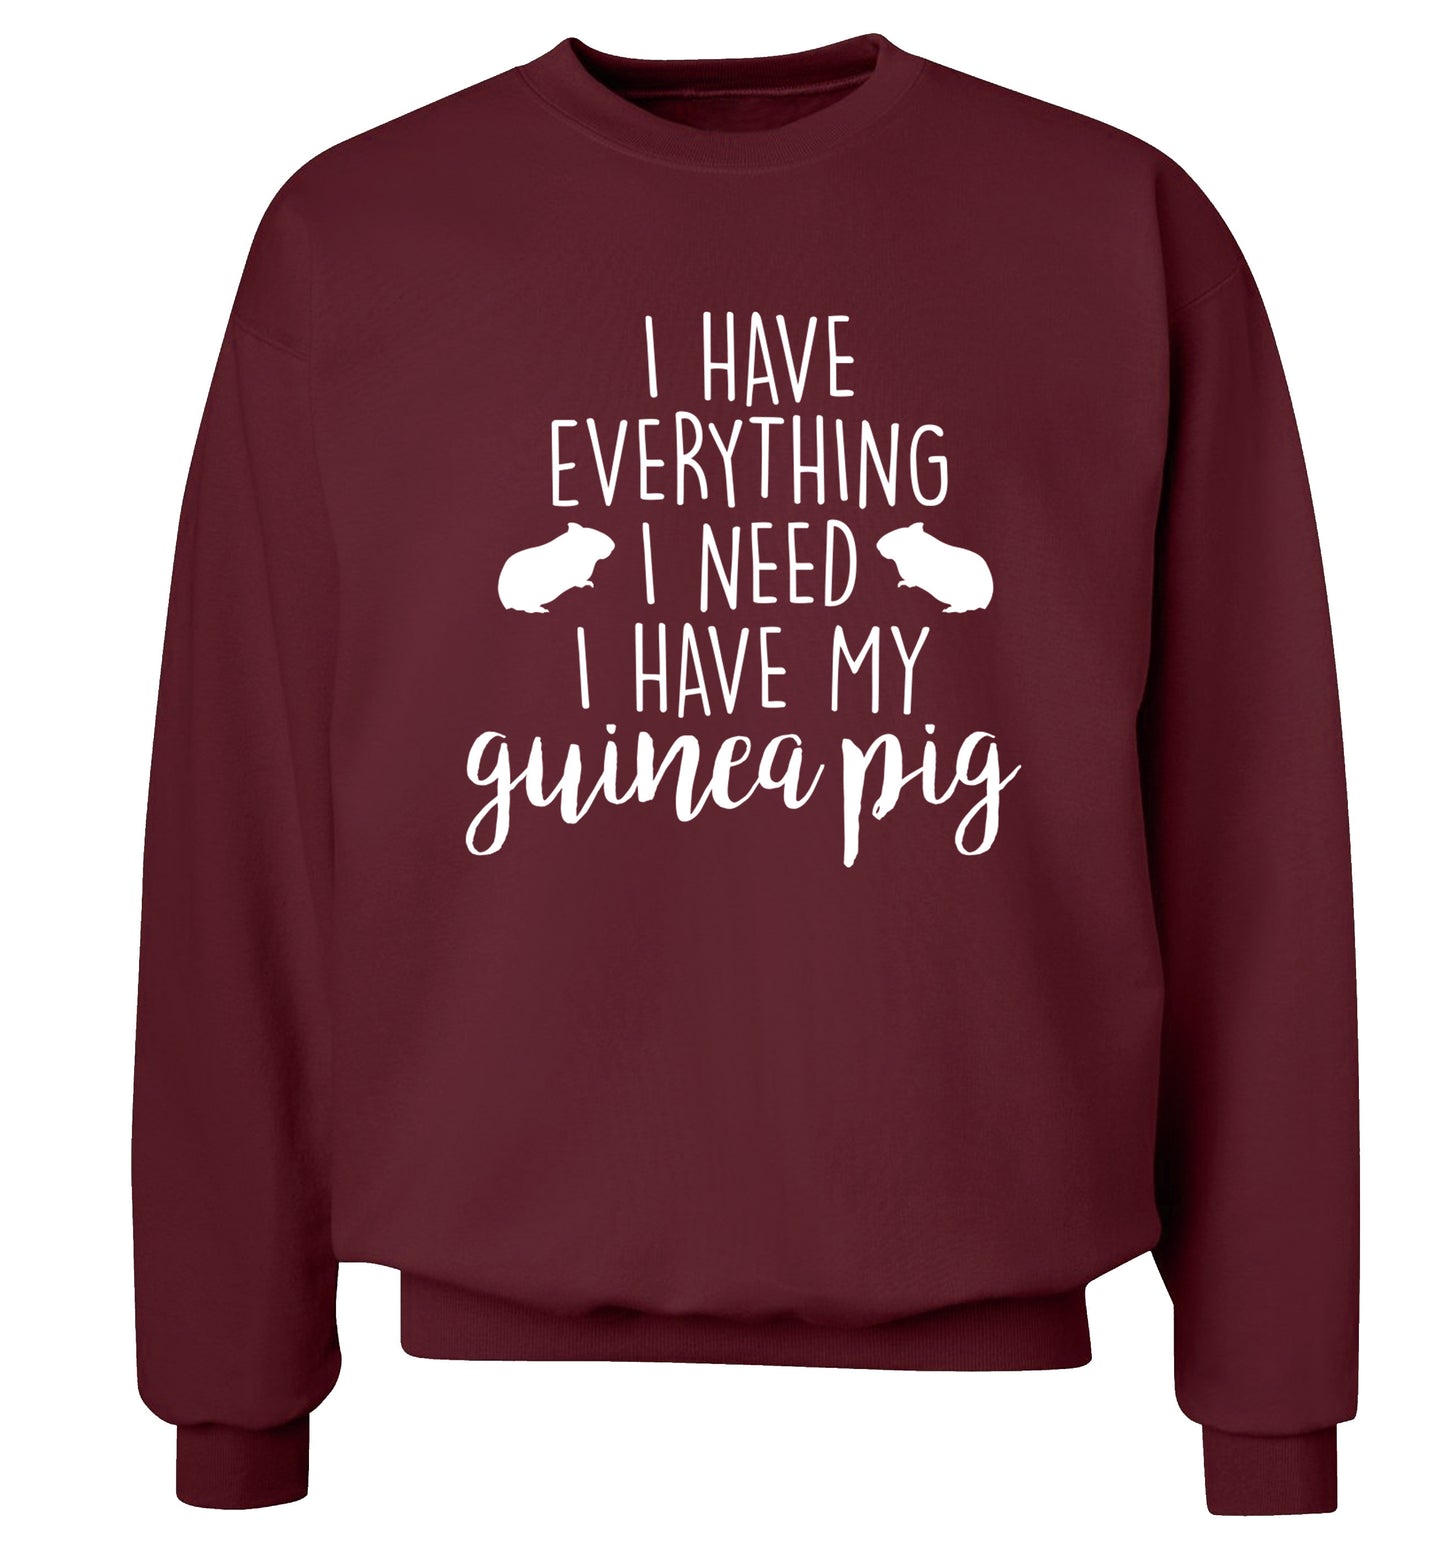 I have everything I need, I have my guinea pig Adult's unisex maroon  sweater 2XL